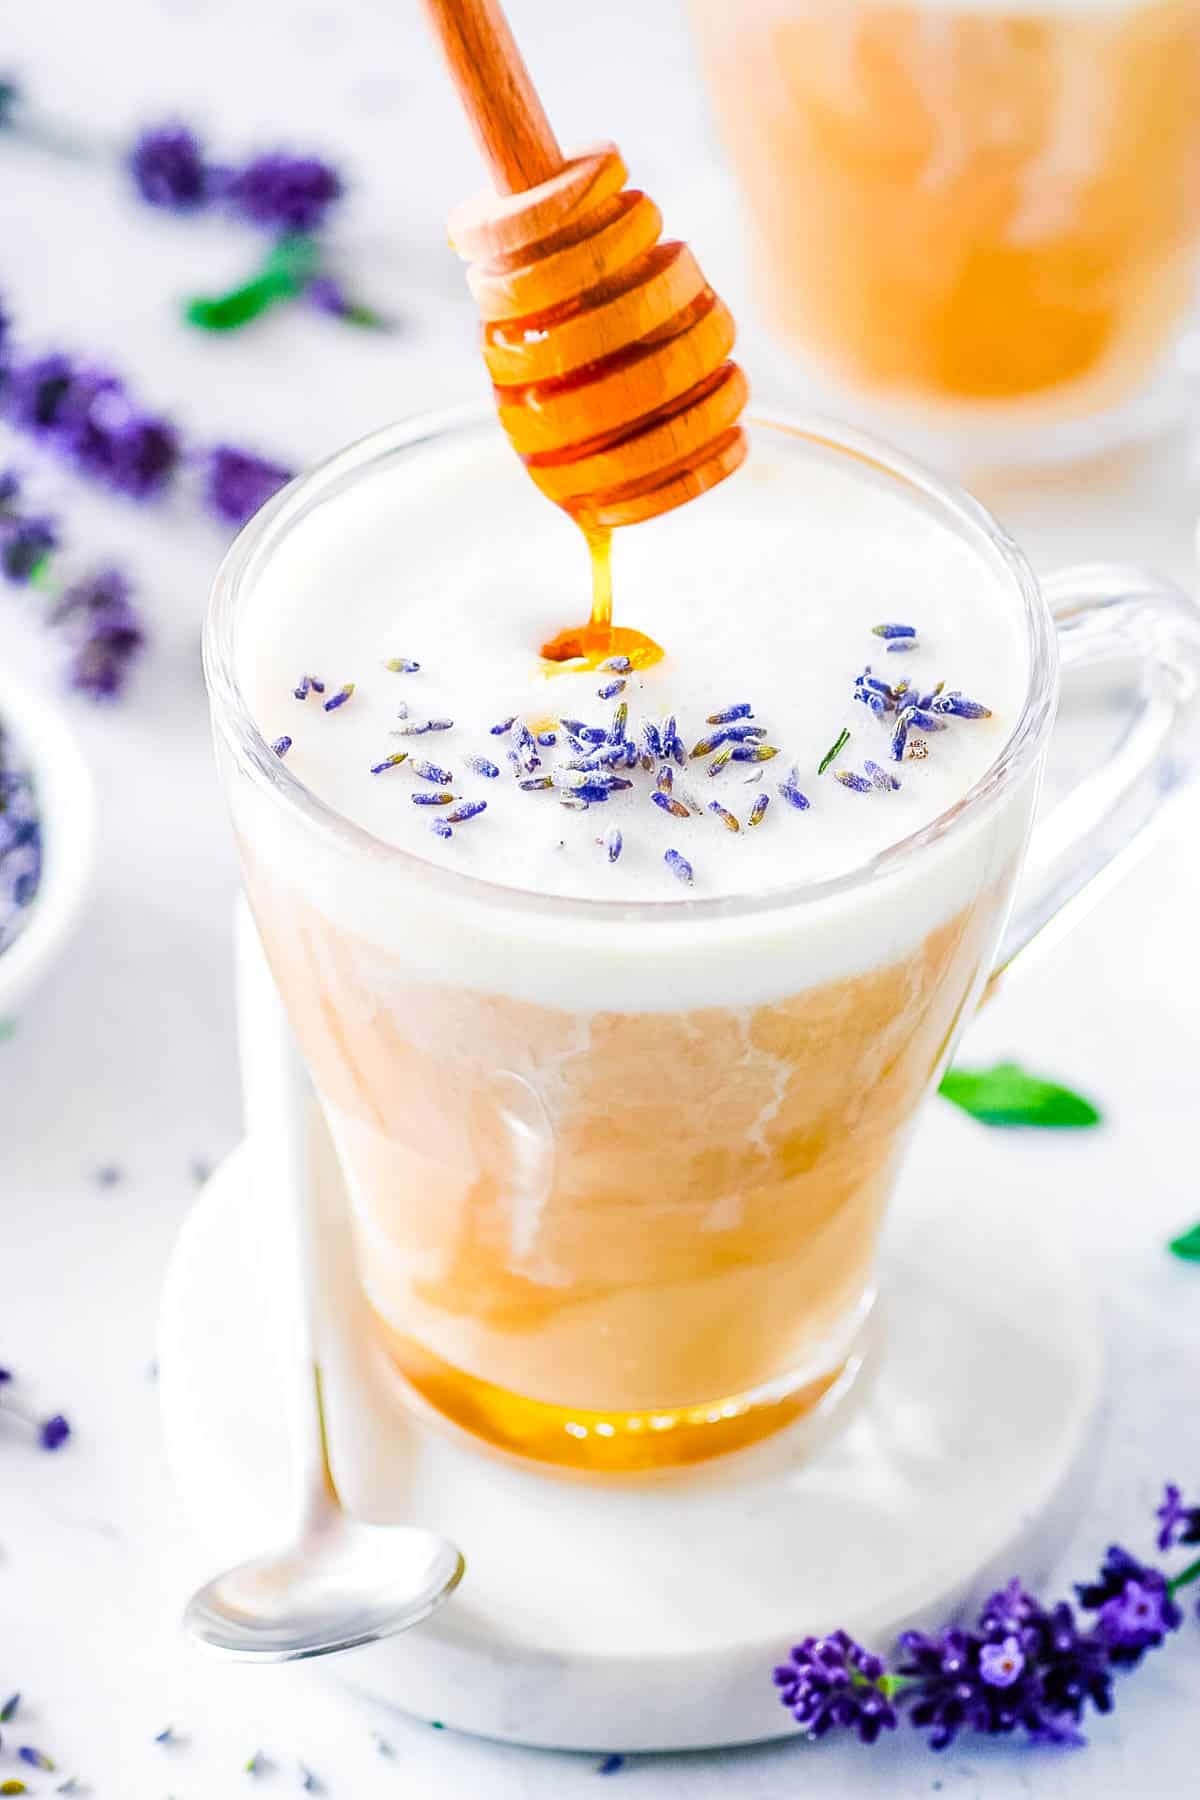 Homemade honey lavender latte served in a glass, garnished with lavender flowers.